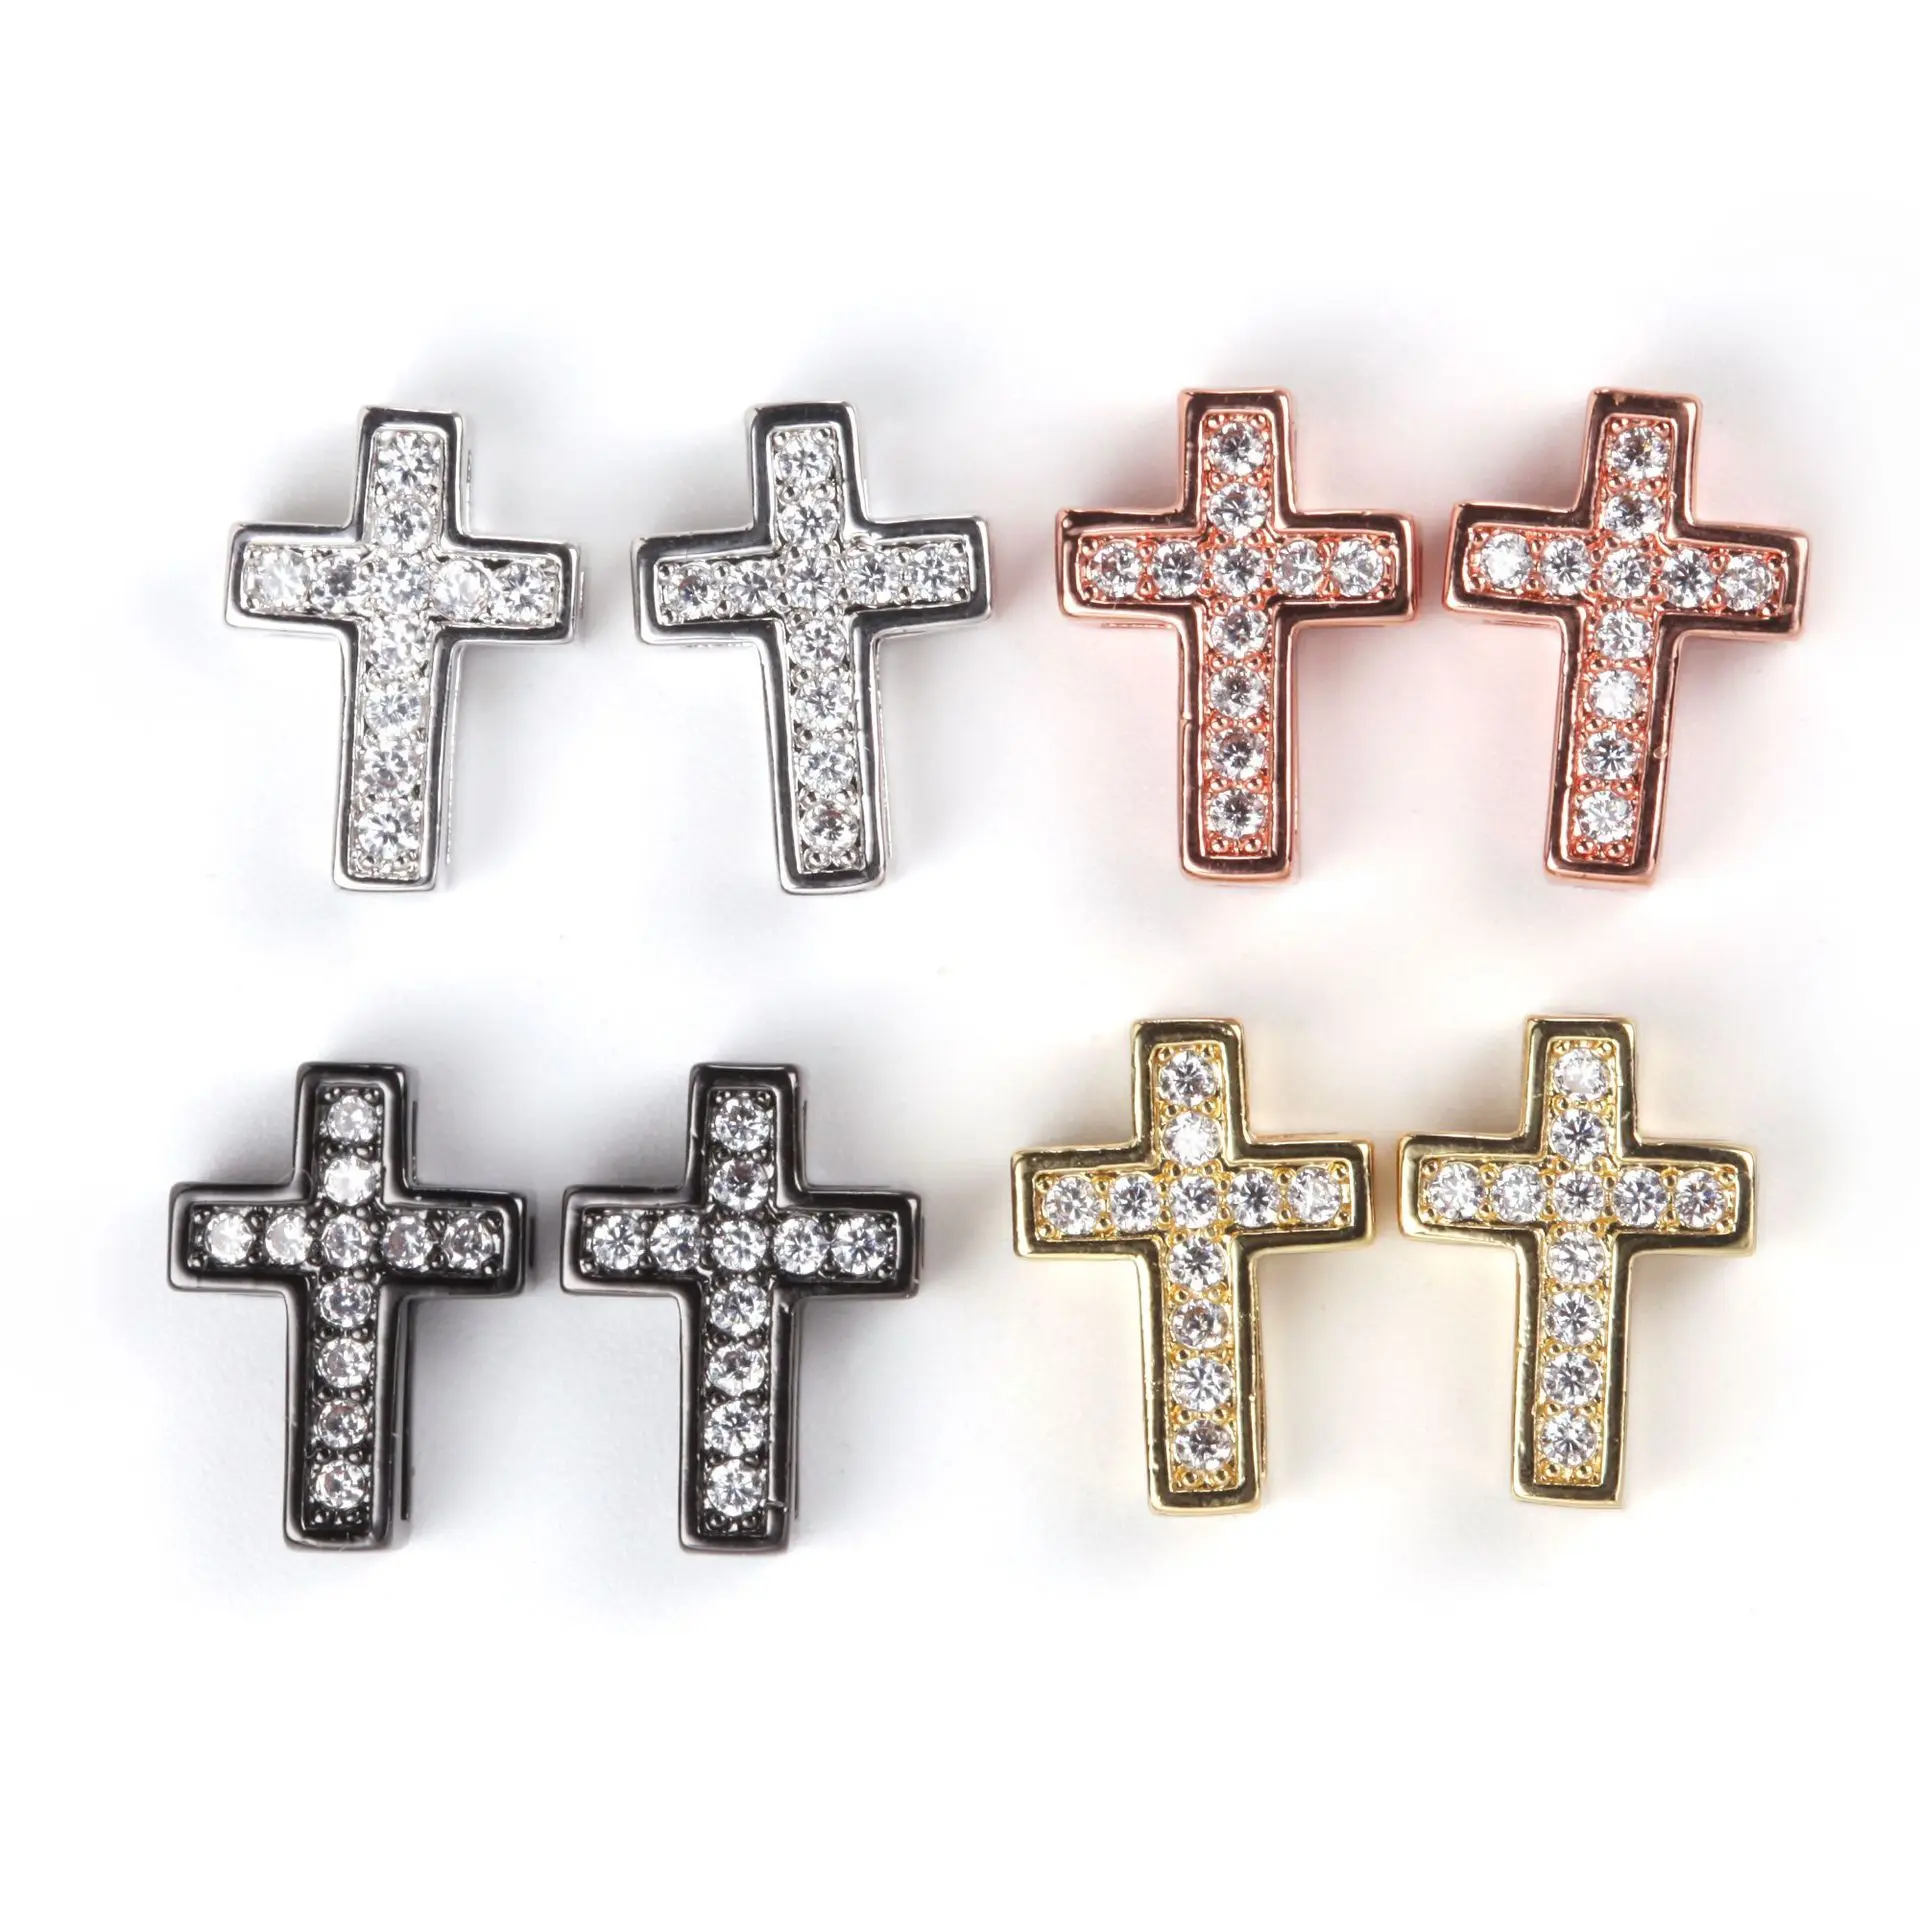 

Micro Pave CZ Copper Alloy Metal DIY Jewelry Accessories Finding Inlay ZIRCON Cross Beads Shape Spacer Charm Pendant, Gold,silver,rose gold,black